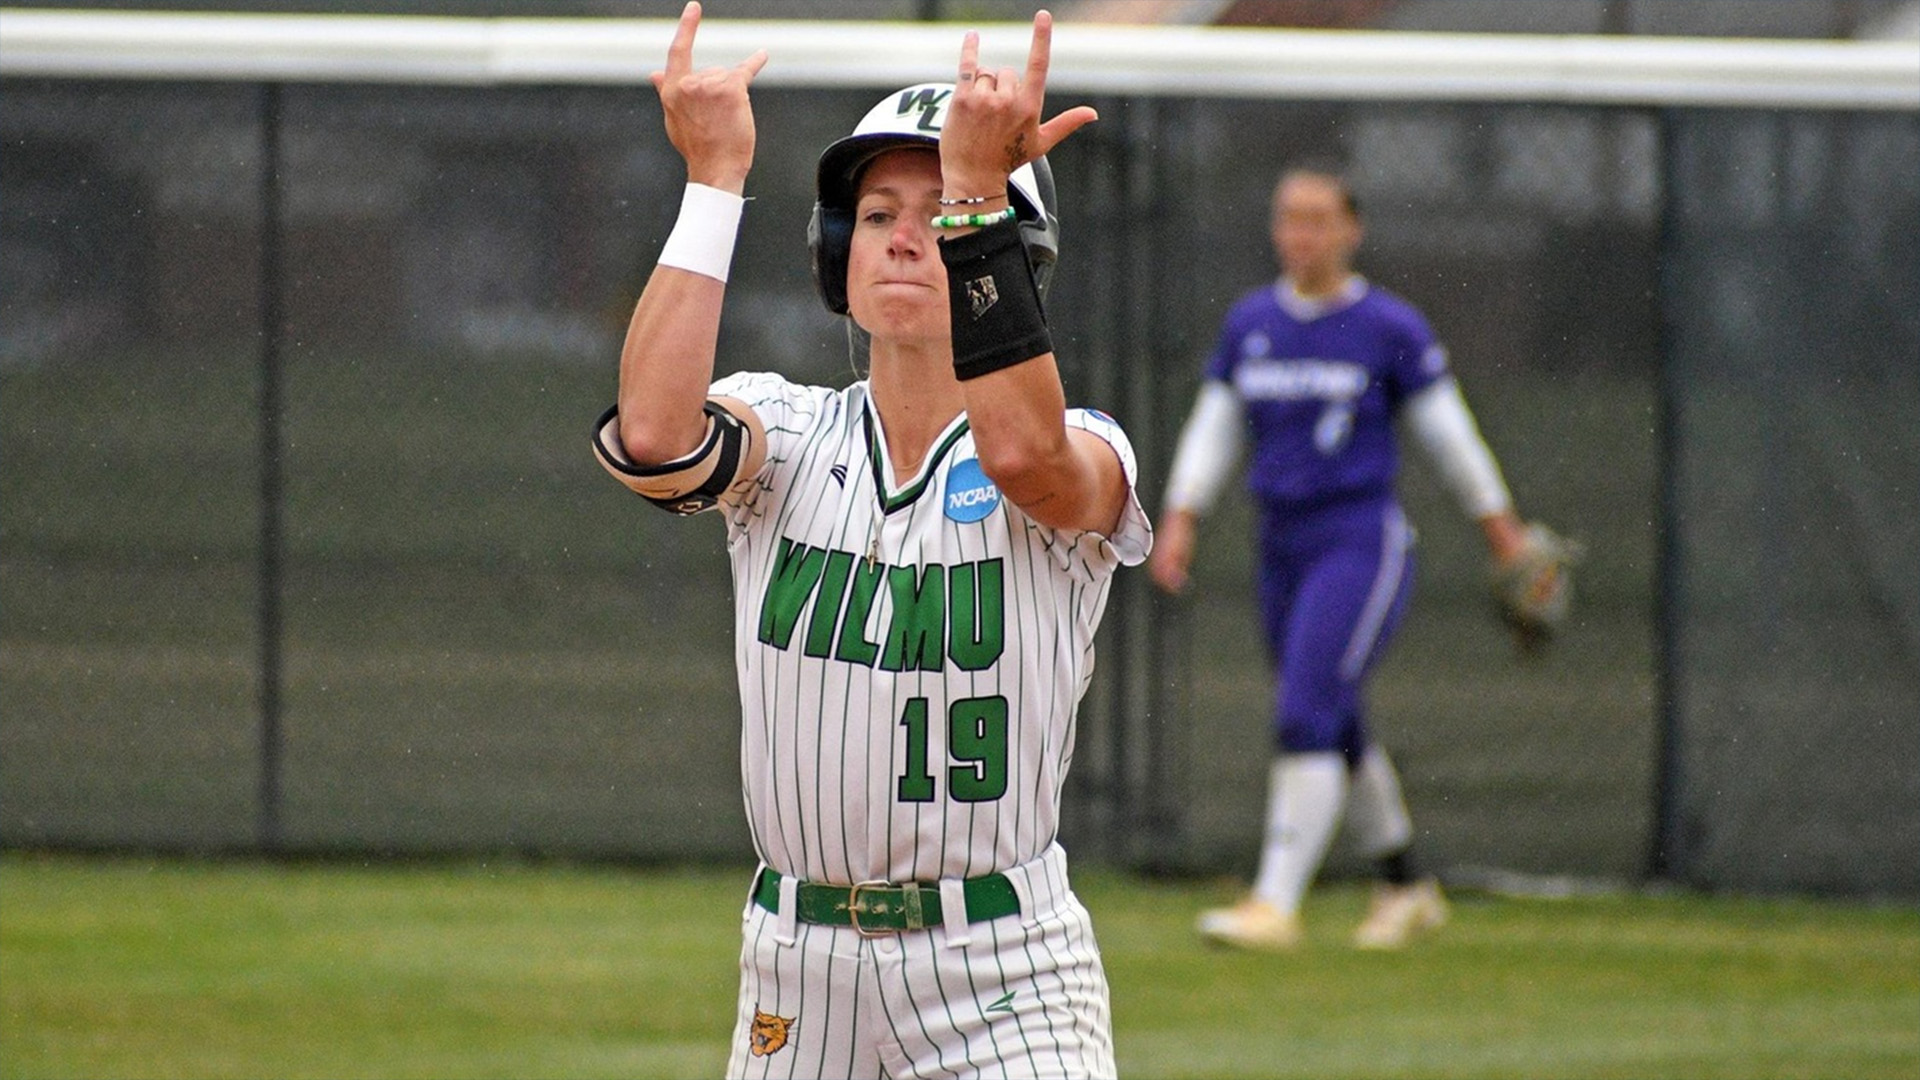 WilmU Wins Game 6 to Force "If Necessary" Game in CACC Softball Championship